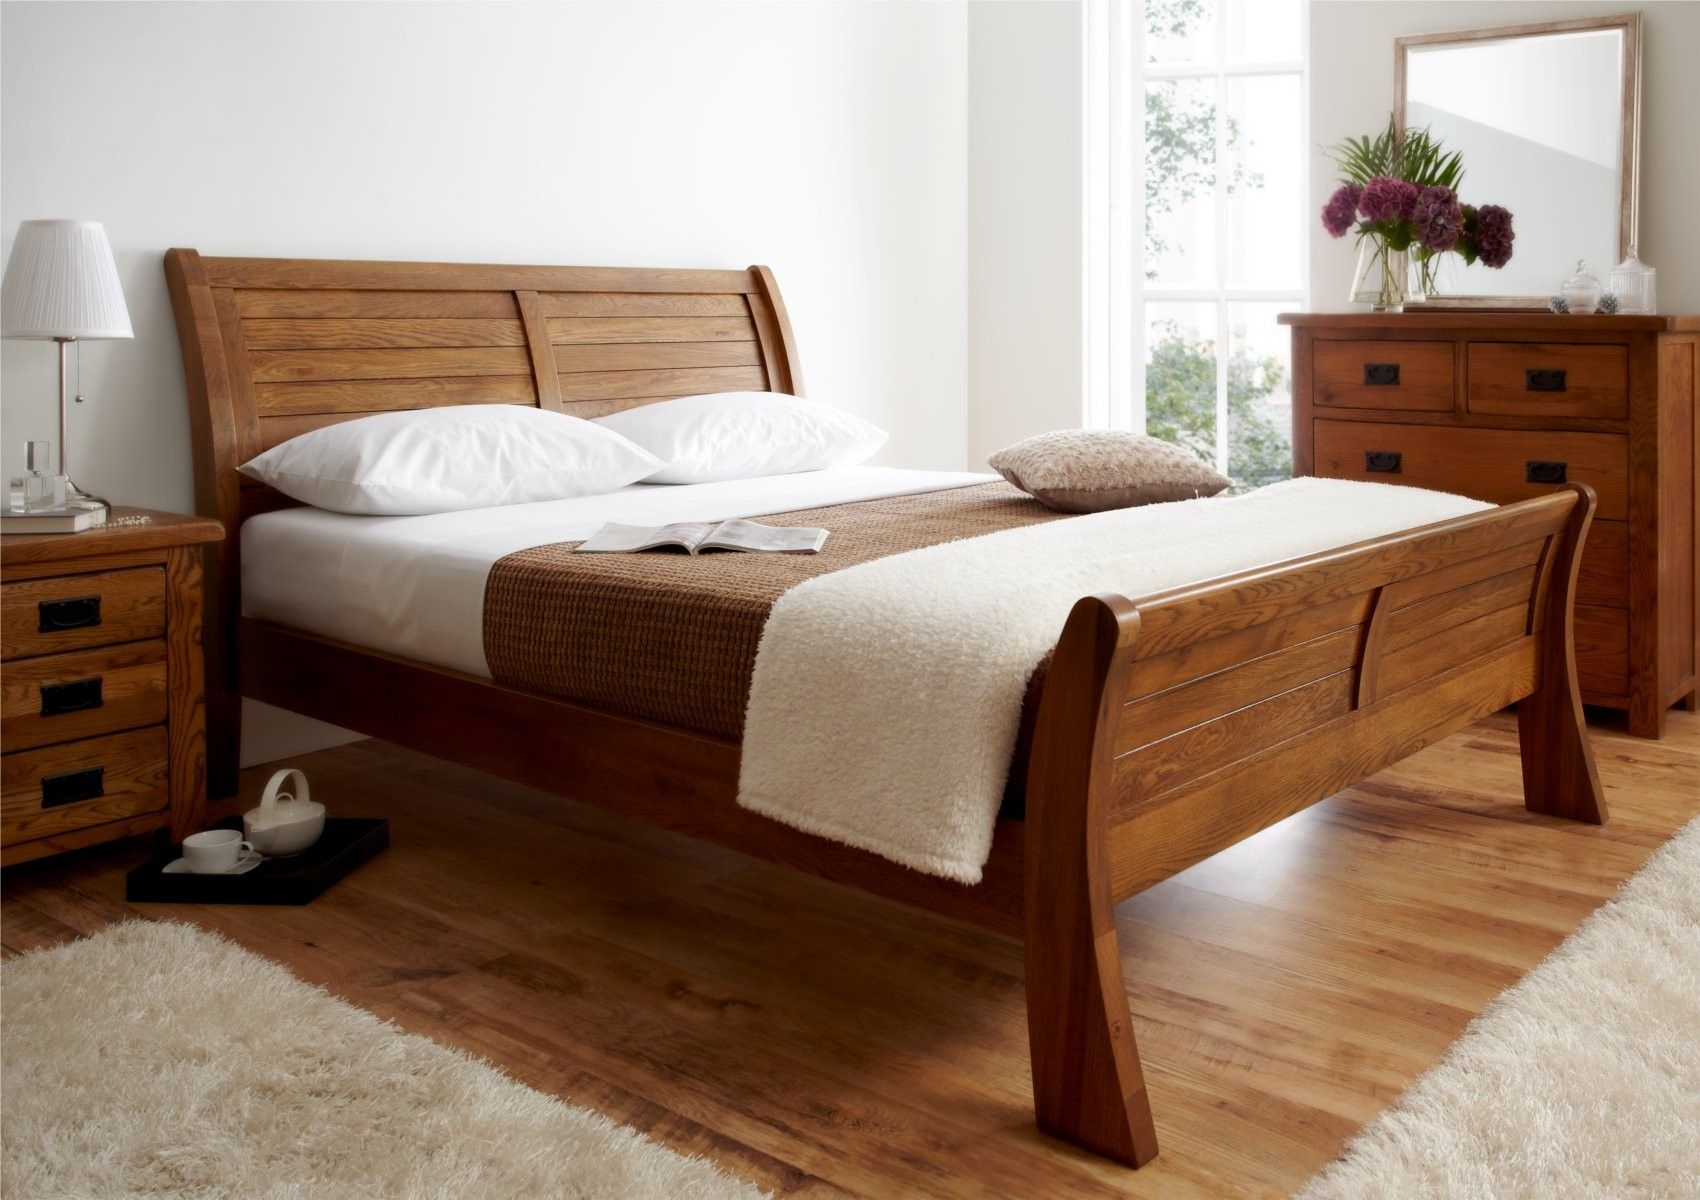 53+ Different Types of Beds, Frames, Styles That Will Go Perfectly ...